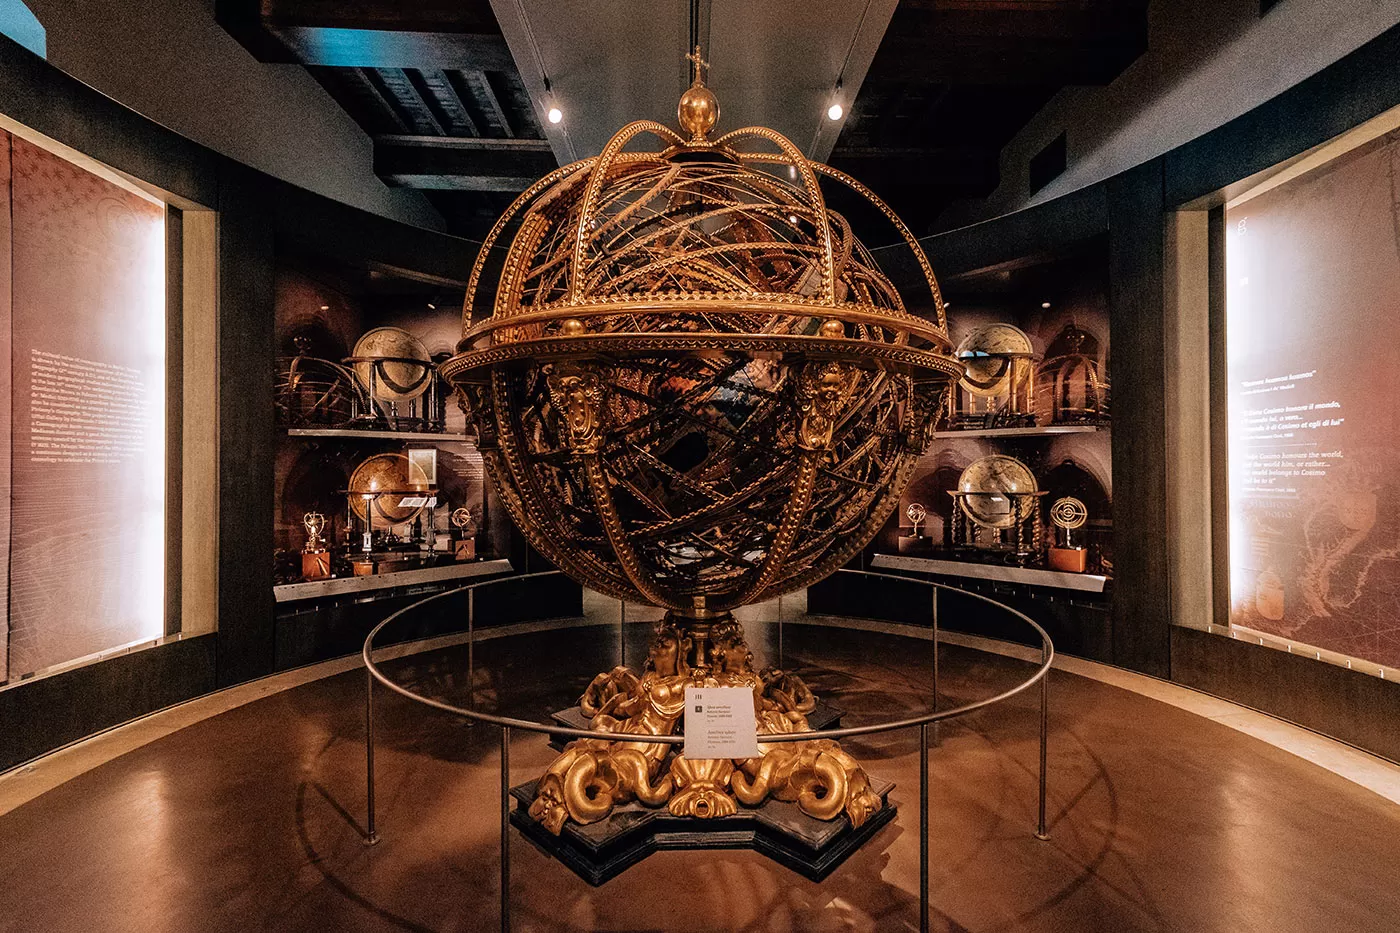 Unique Things to Do in Florence - Galileo Museum - Santucci's Armillary Sphere